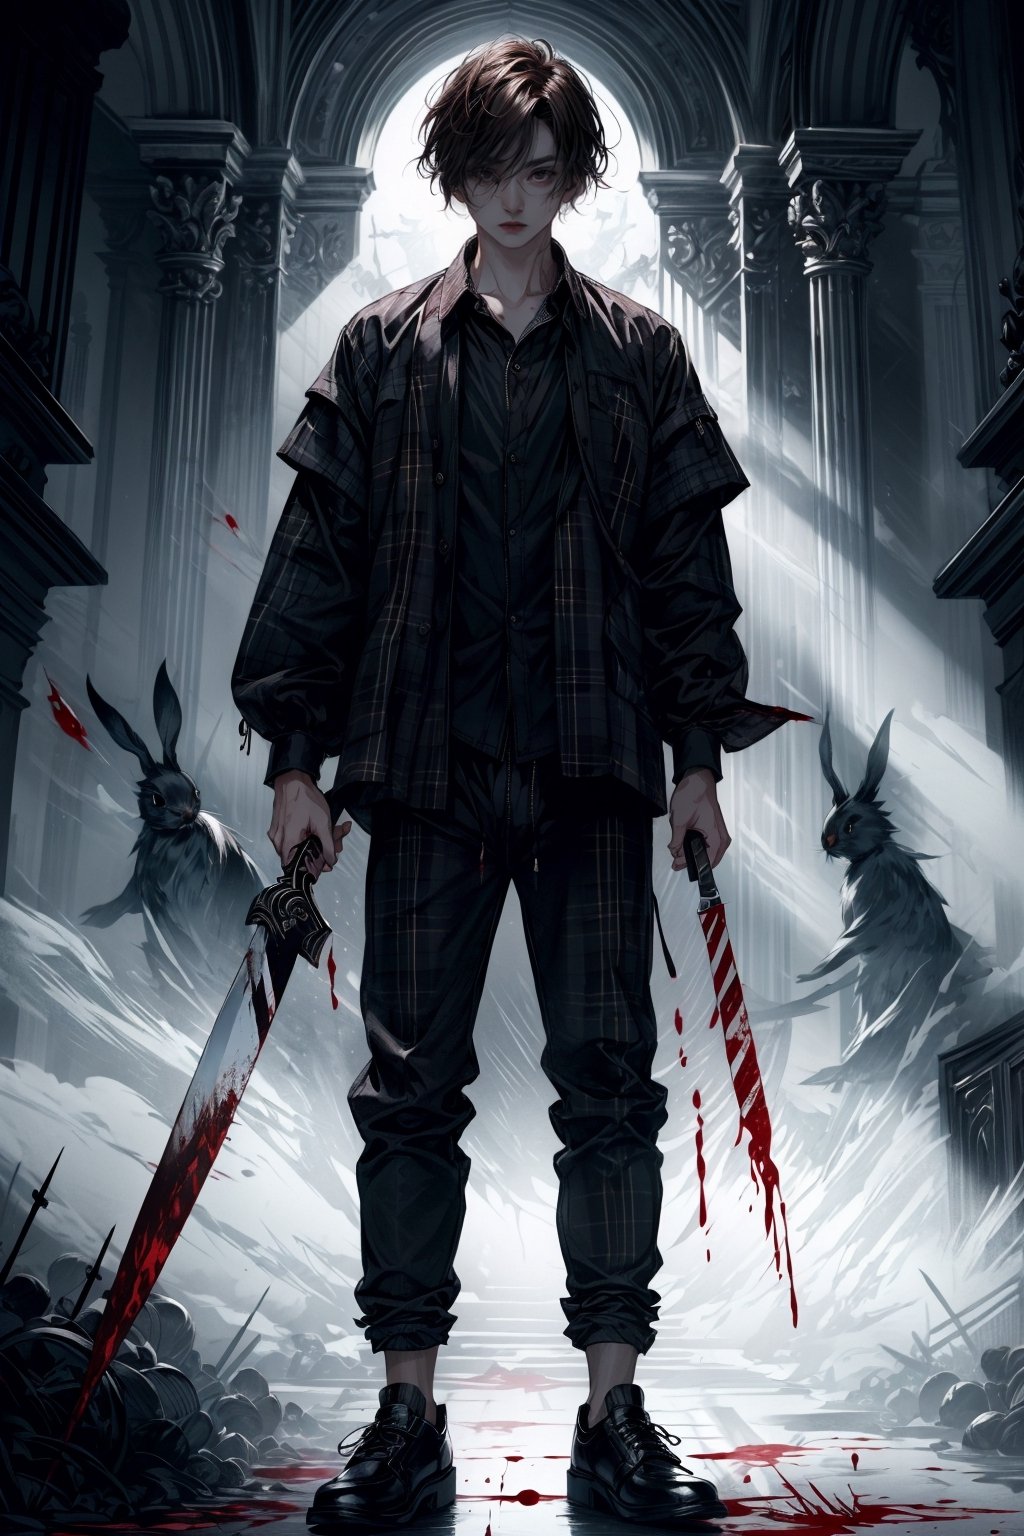 A boy with dark brown hair wearing a blood-stained Killer Bunny mask, dressed in ordinary clothes, plaid blouse, black sweatpants, black polished shoes, white skin, holding a knife, dramatic lighting, gothic atmosphere.